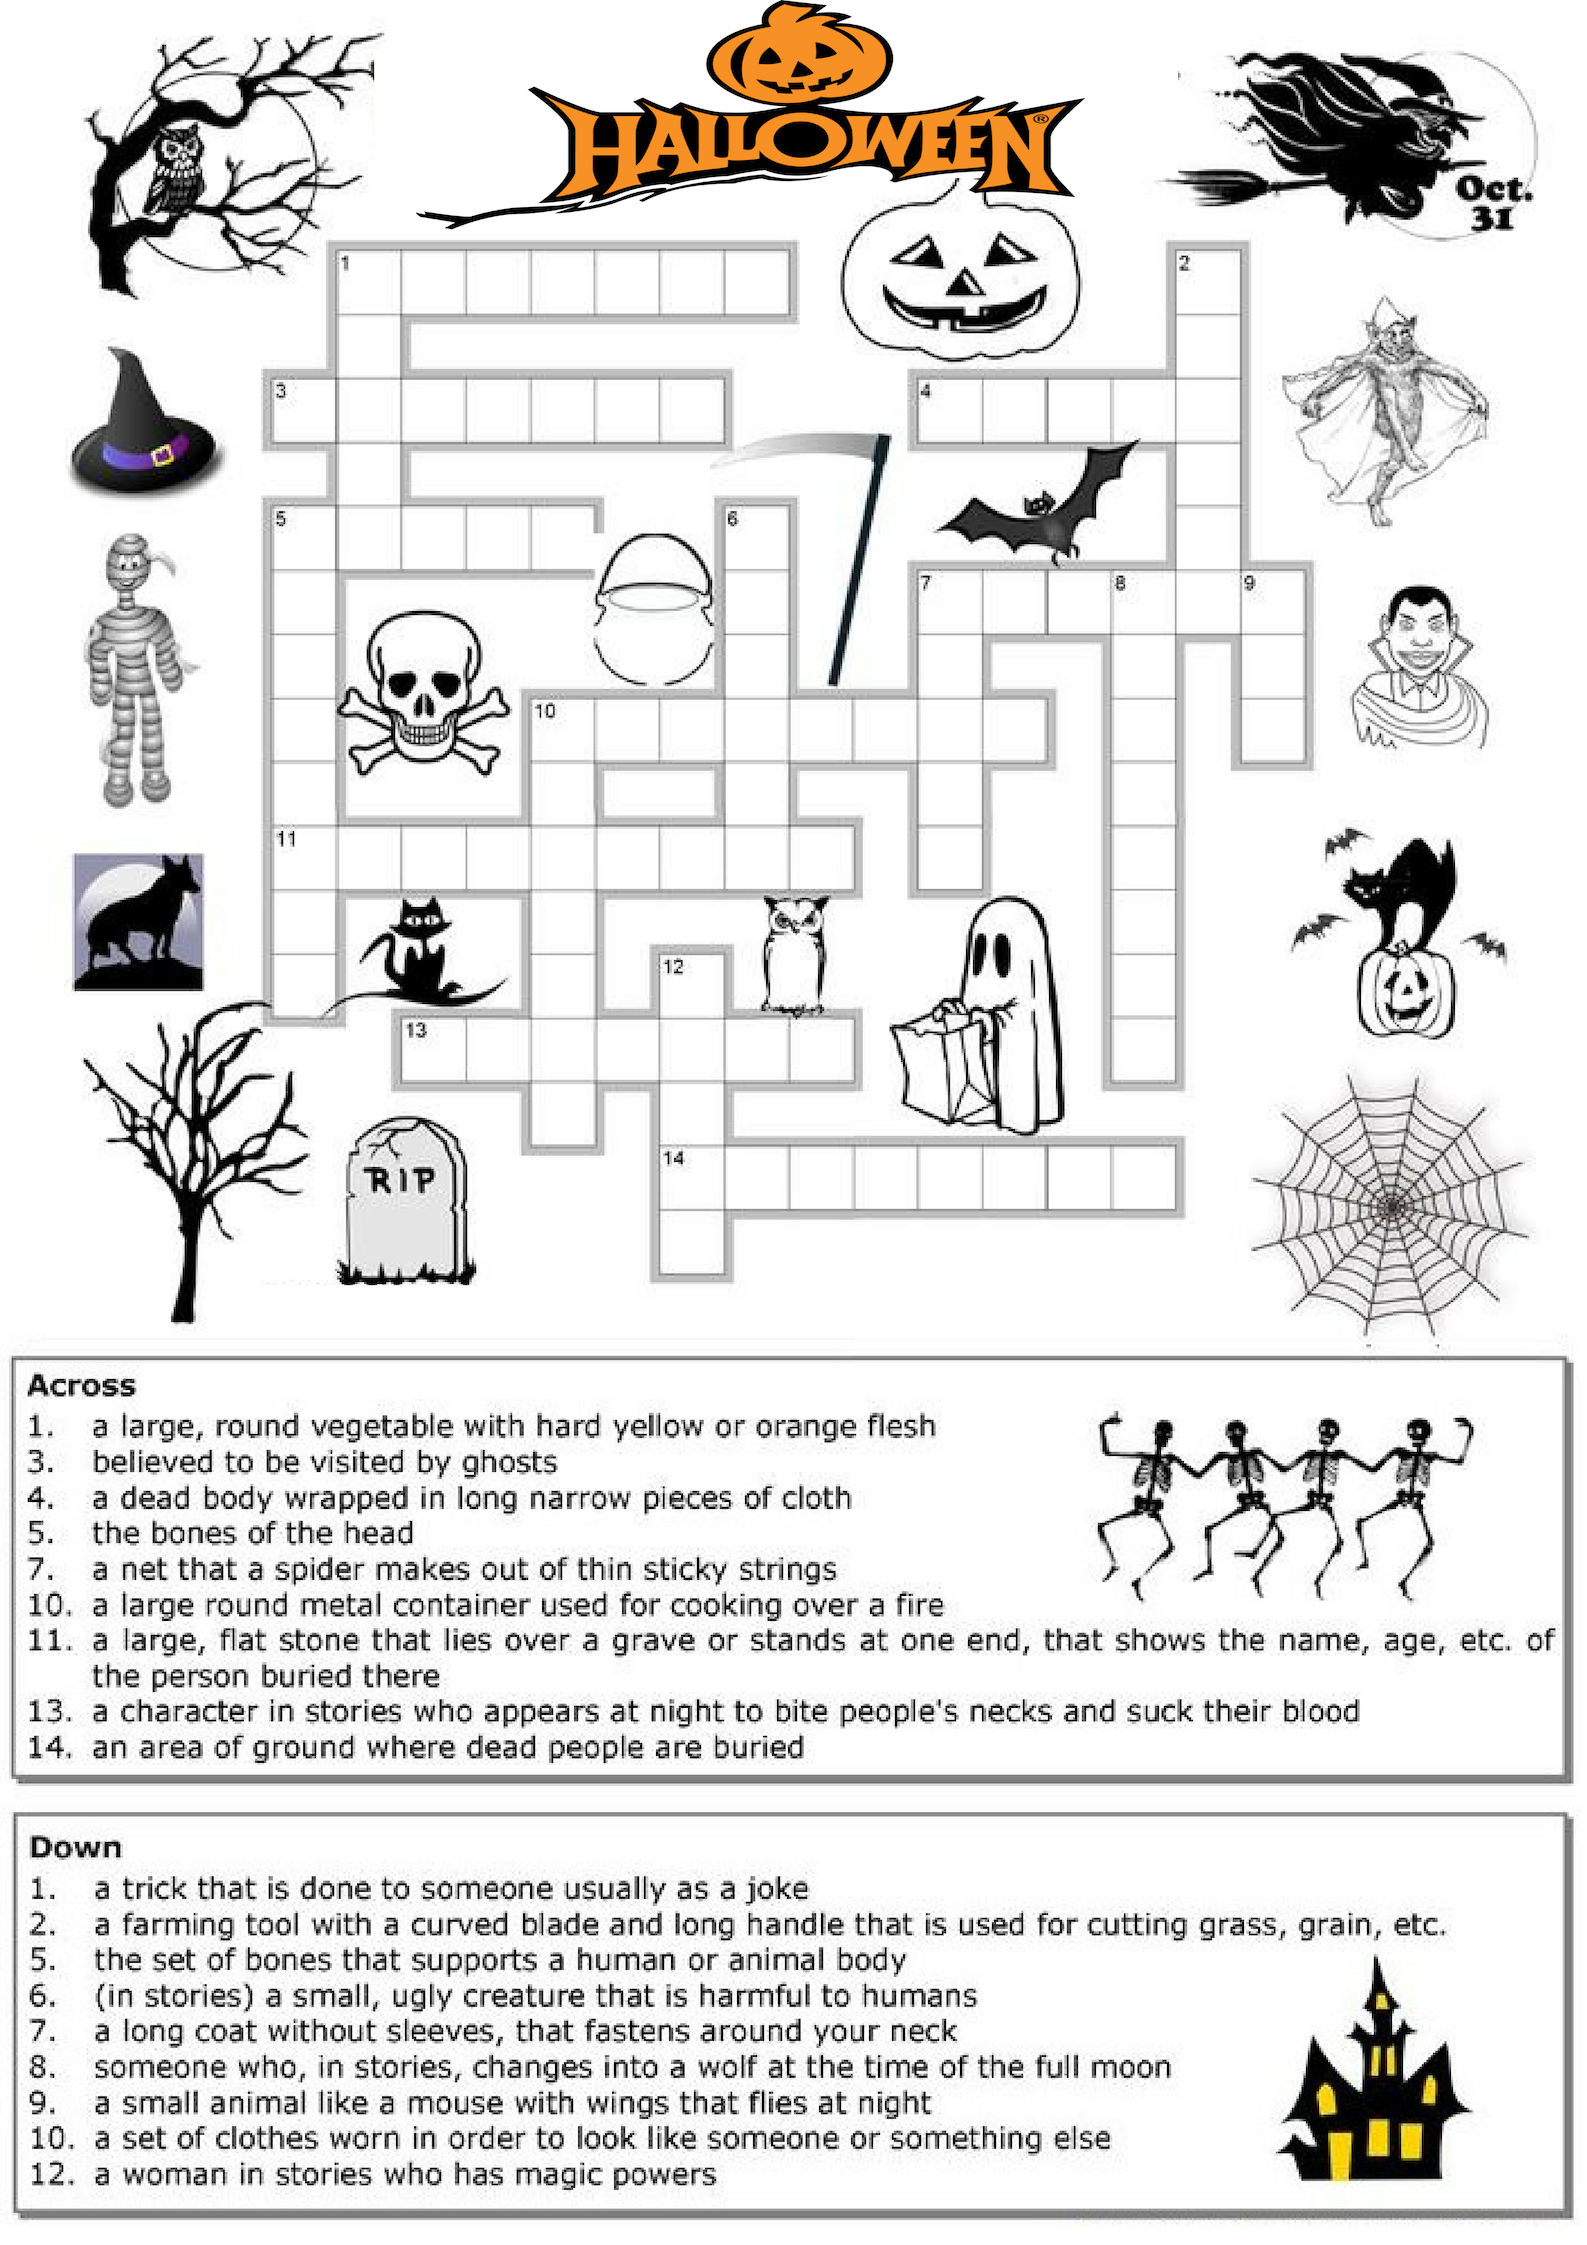 Play and Solve this interesting Halloween Crossword Puzzle